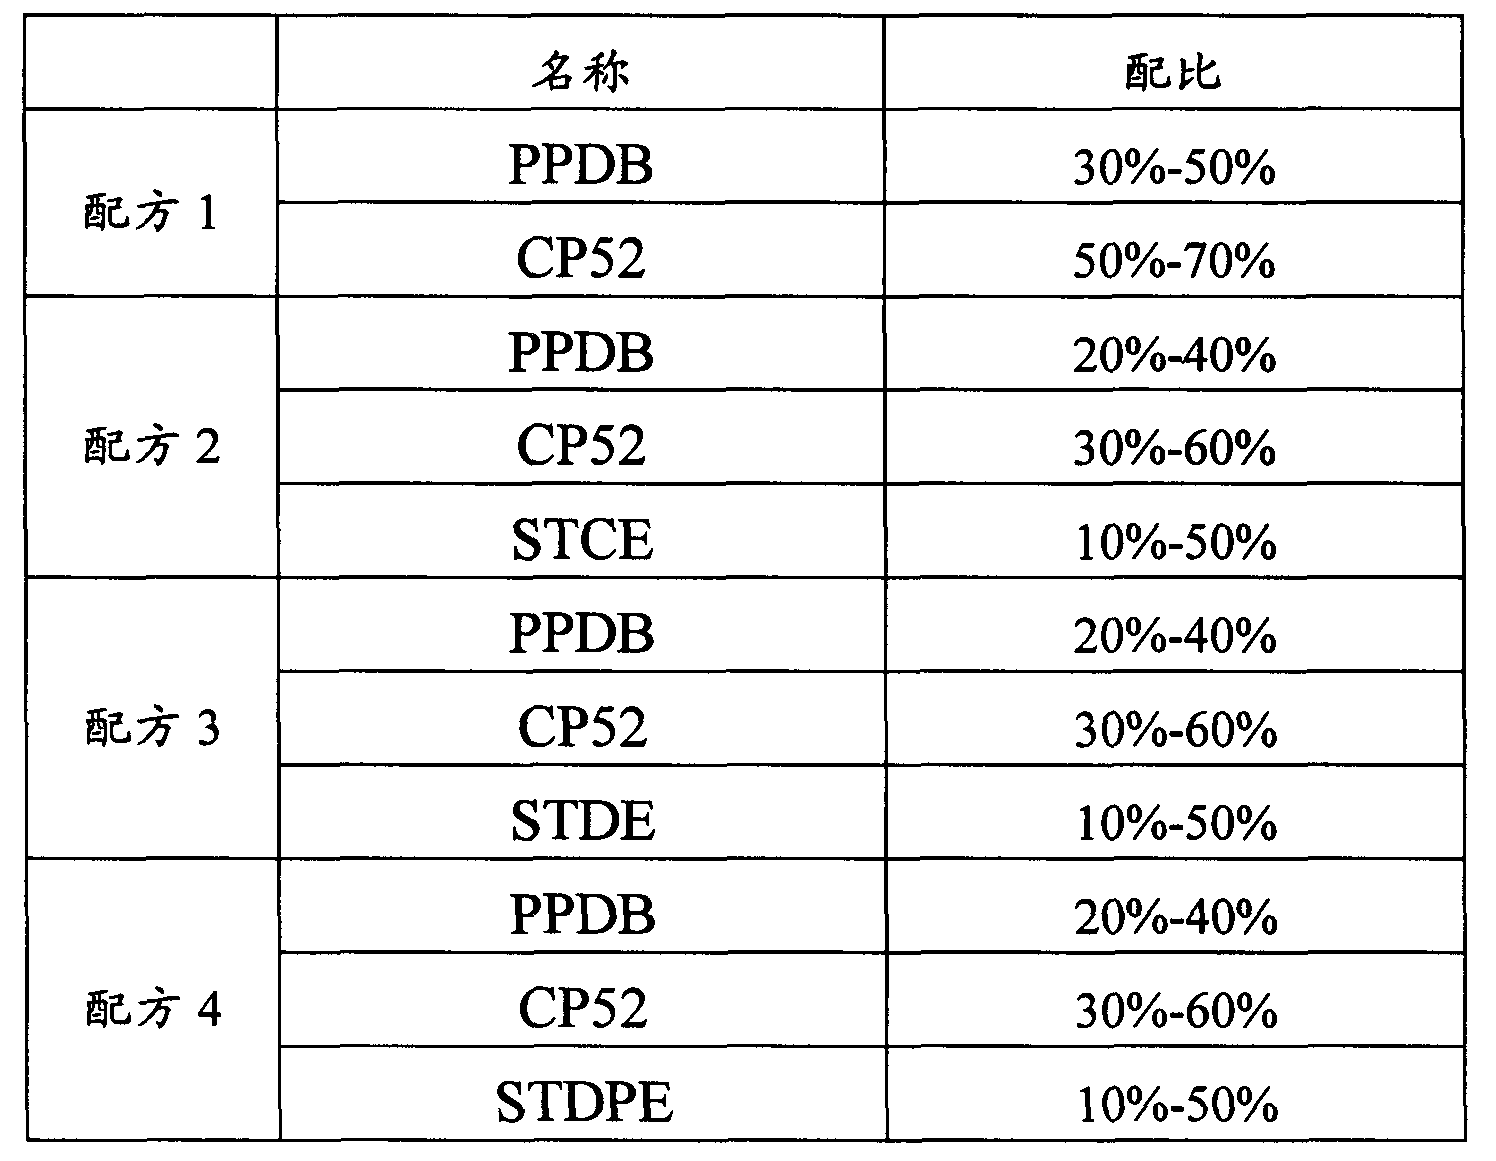 Dibutyl phenylphosphinate (PPDB) flame retardant composition and application method thereof